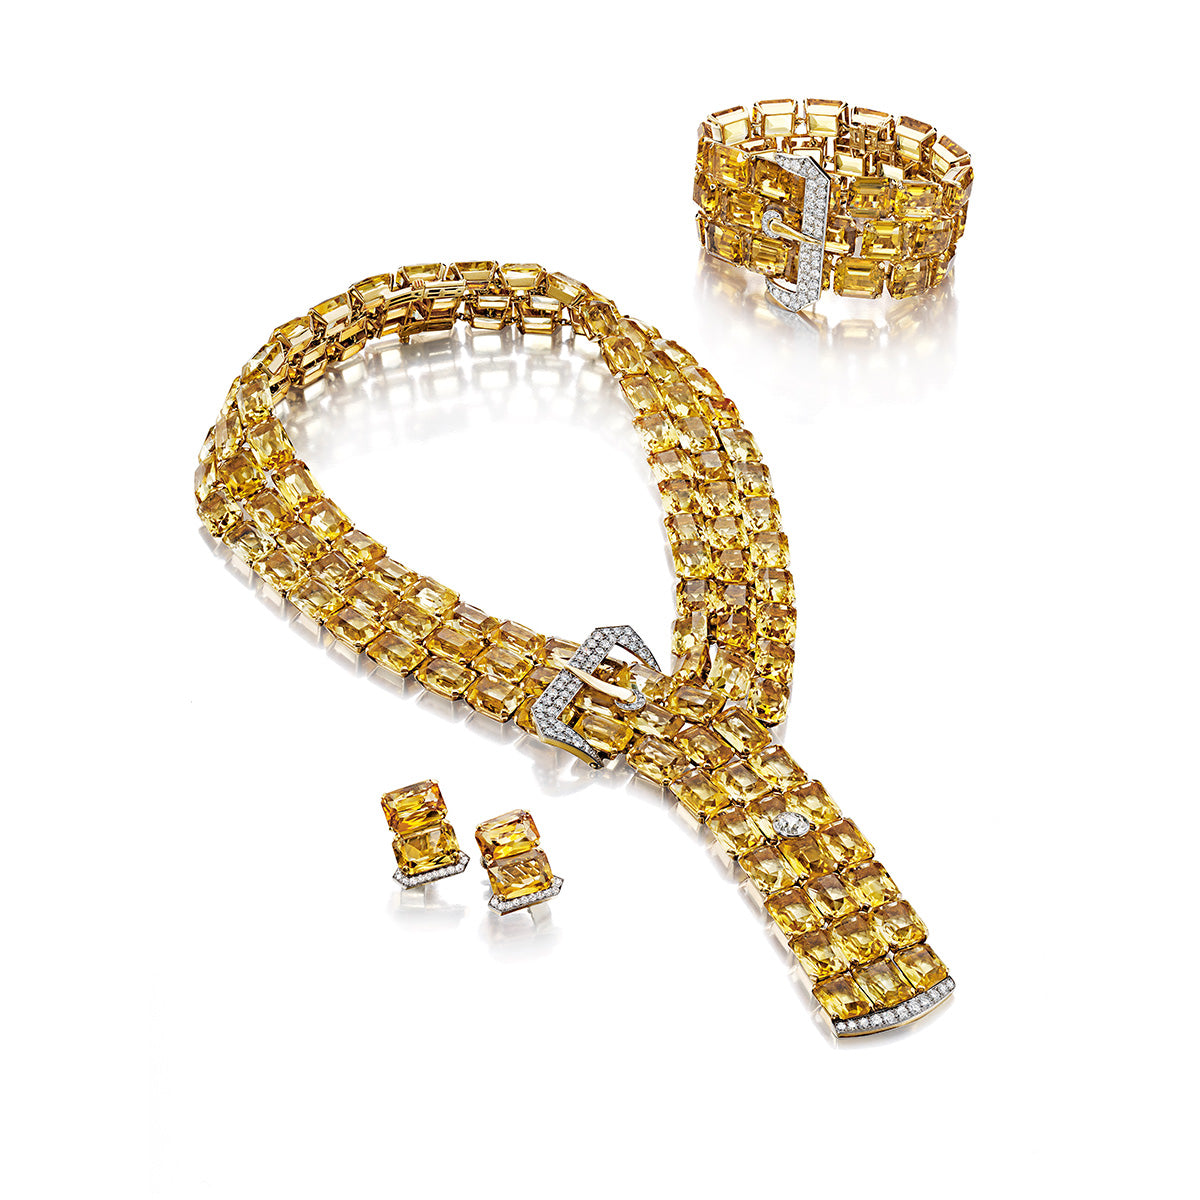 THE TIBBETT SUITE: A CITRINE AND DIAMOND BELT WITH A BUCKLE NECKLACE AND EARRINGS BY PAUL FLATO, NEW YORK, CIRCA 1940, BRACELET BY LAMBERT BROTHERS, NEW YORK, CIRCA 1950